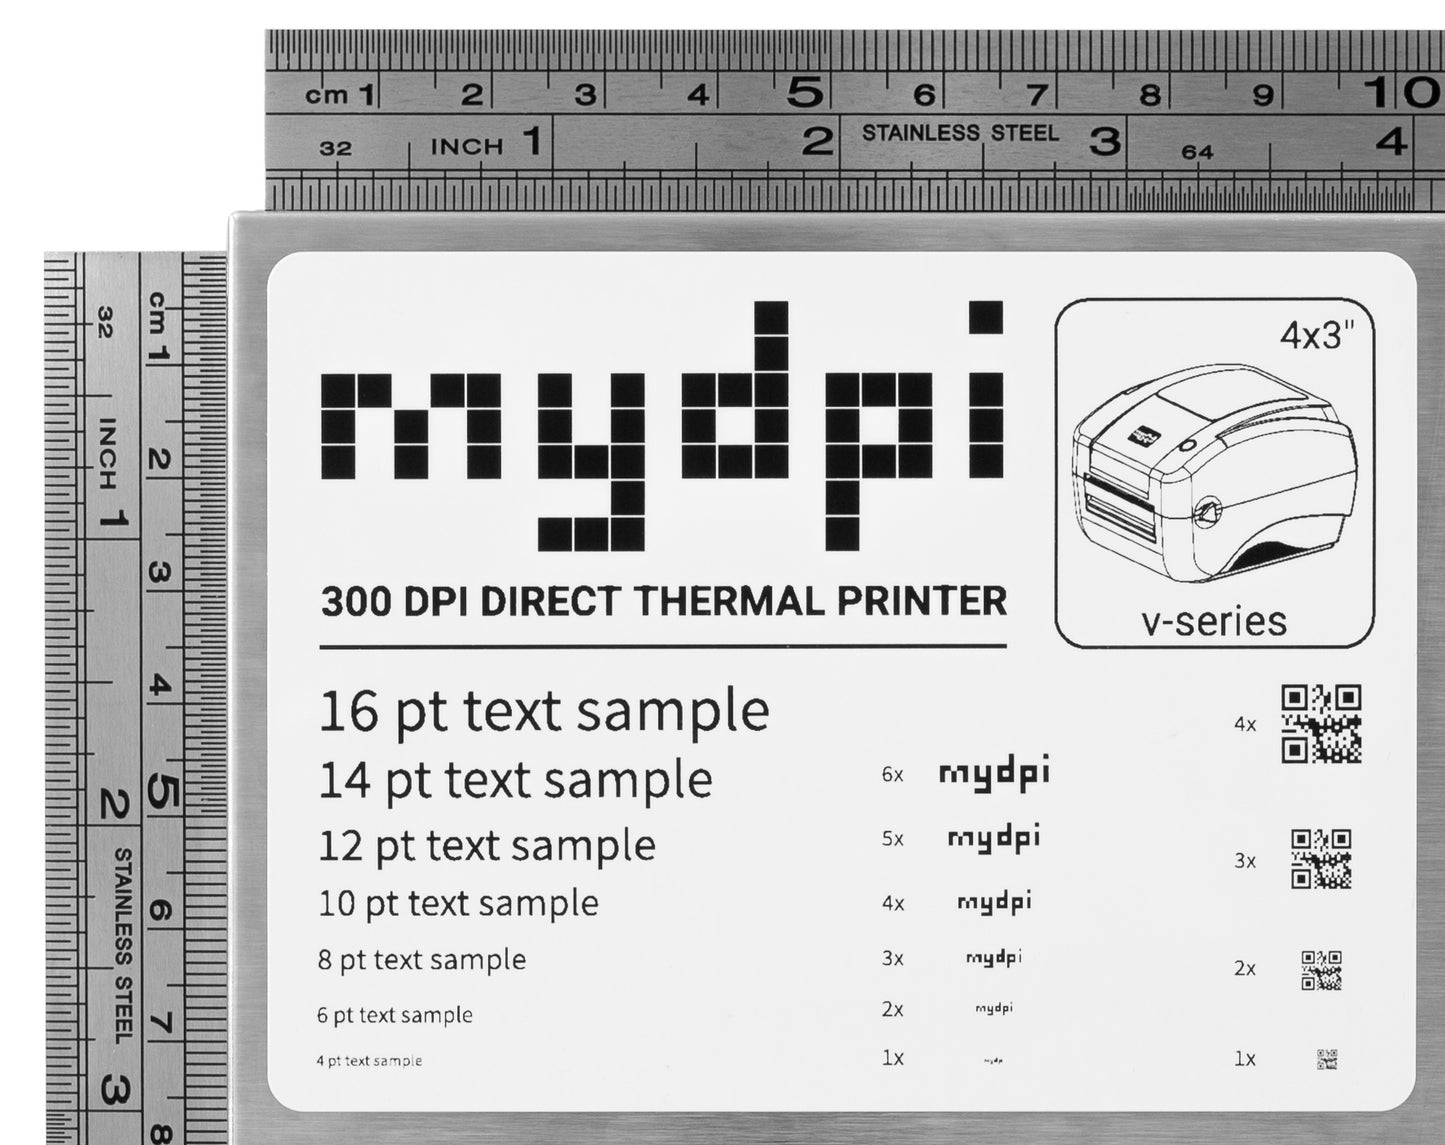 Professional Direct Thermal Labels for v-series